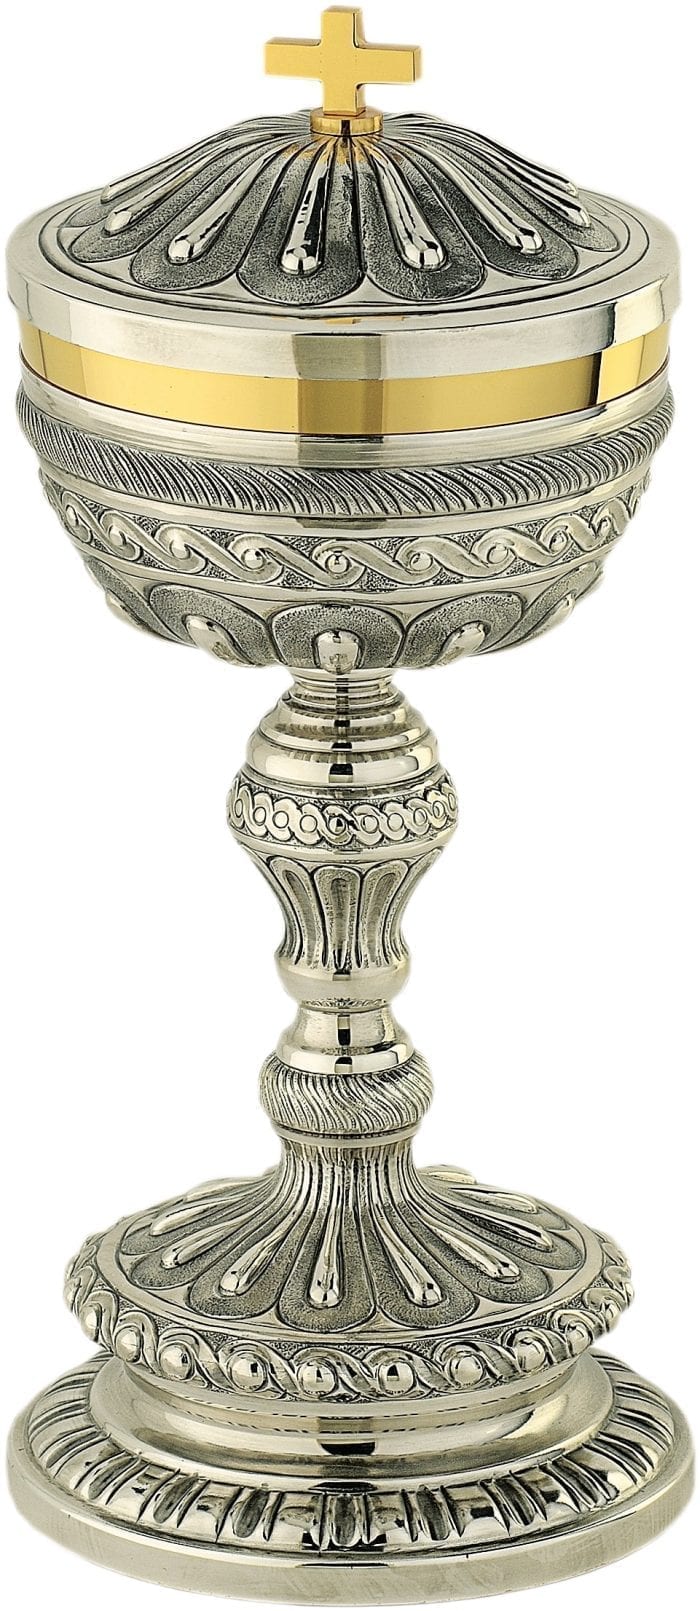 Pisside "Eliseo" Maranatha Lab in fusion of two-tone brass chiseled by hand. Similar to chalice art.2628/a